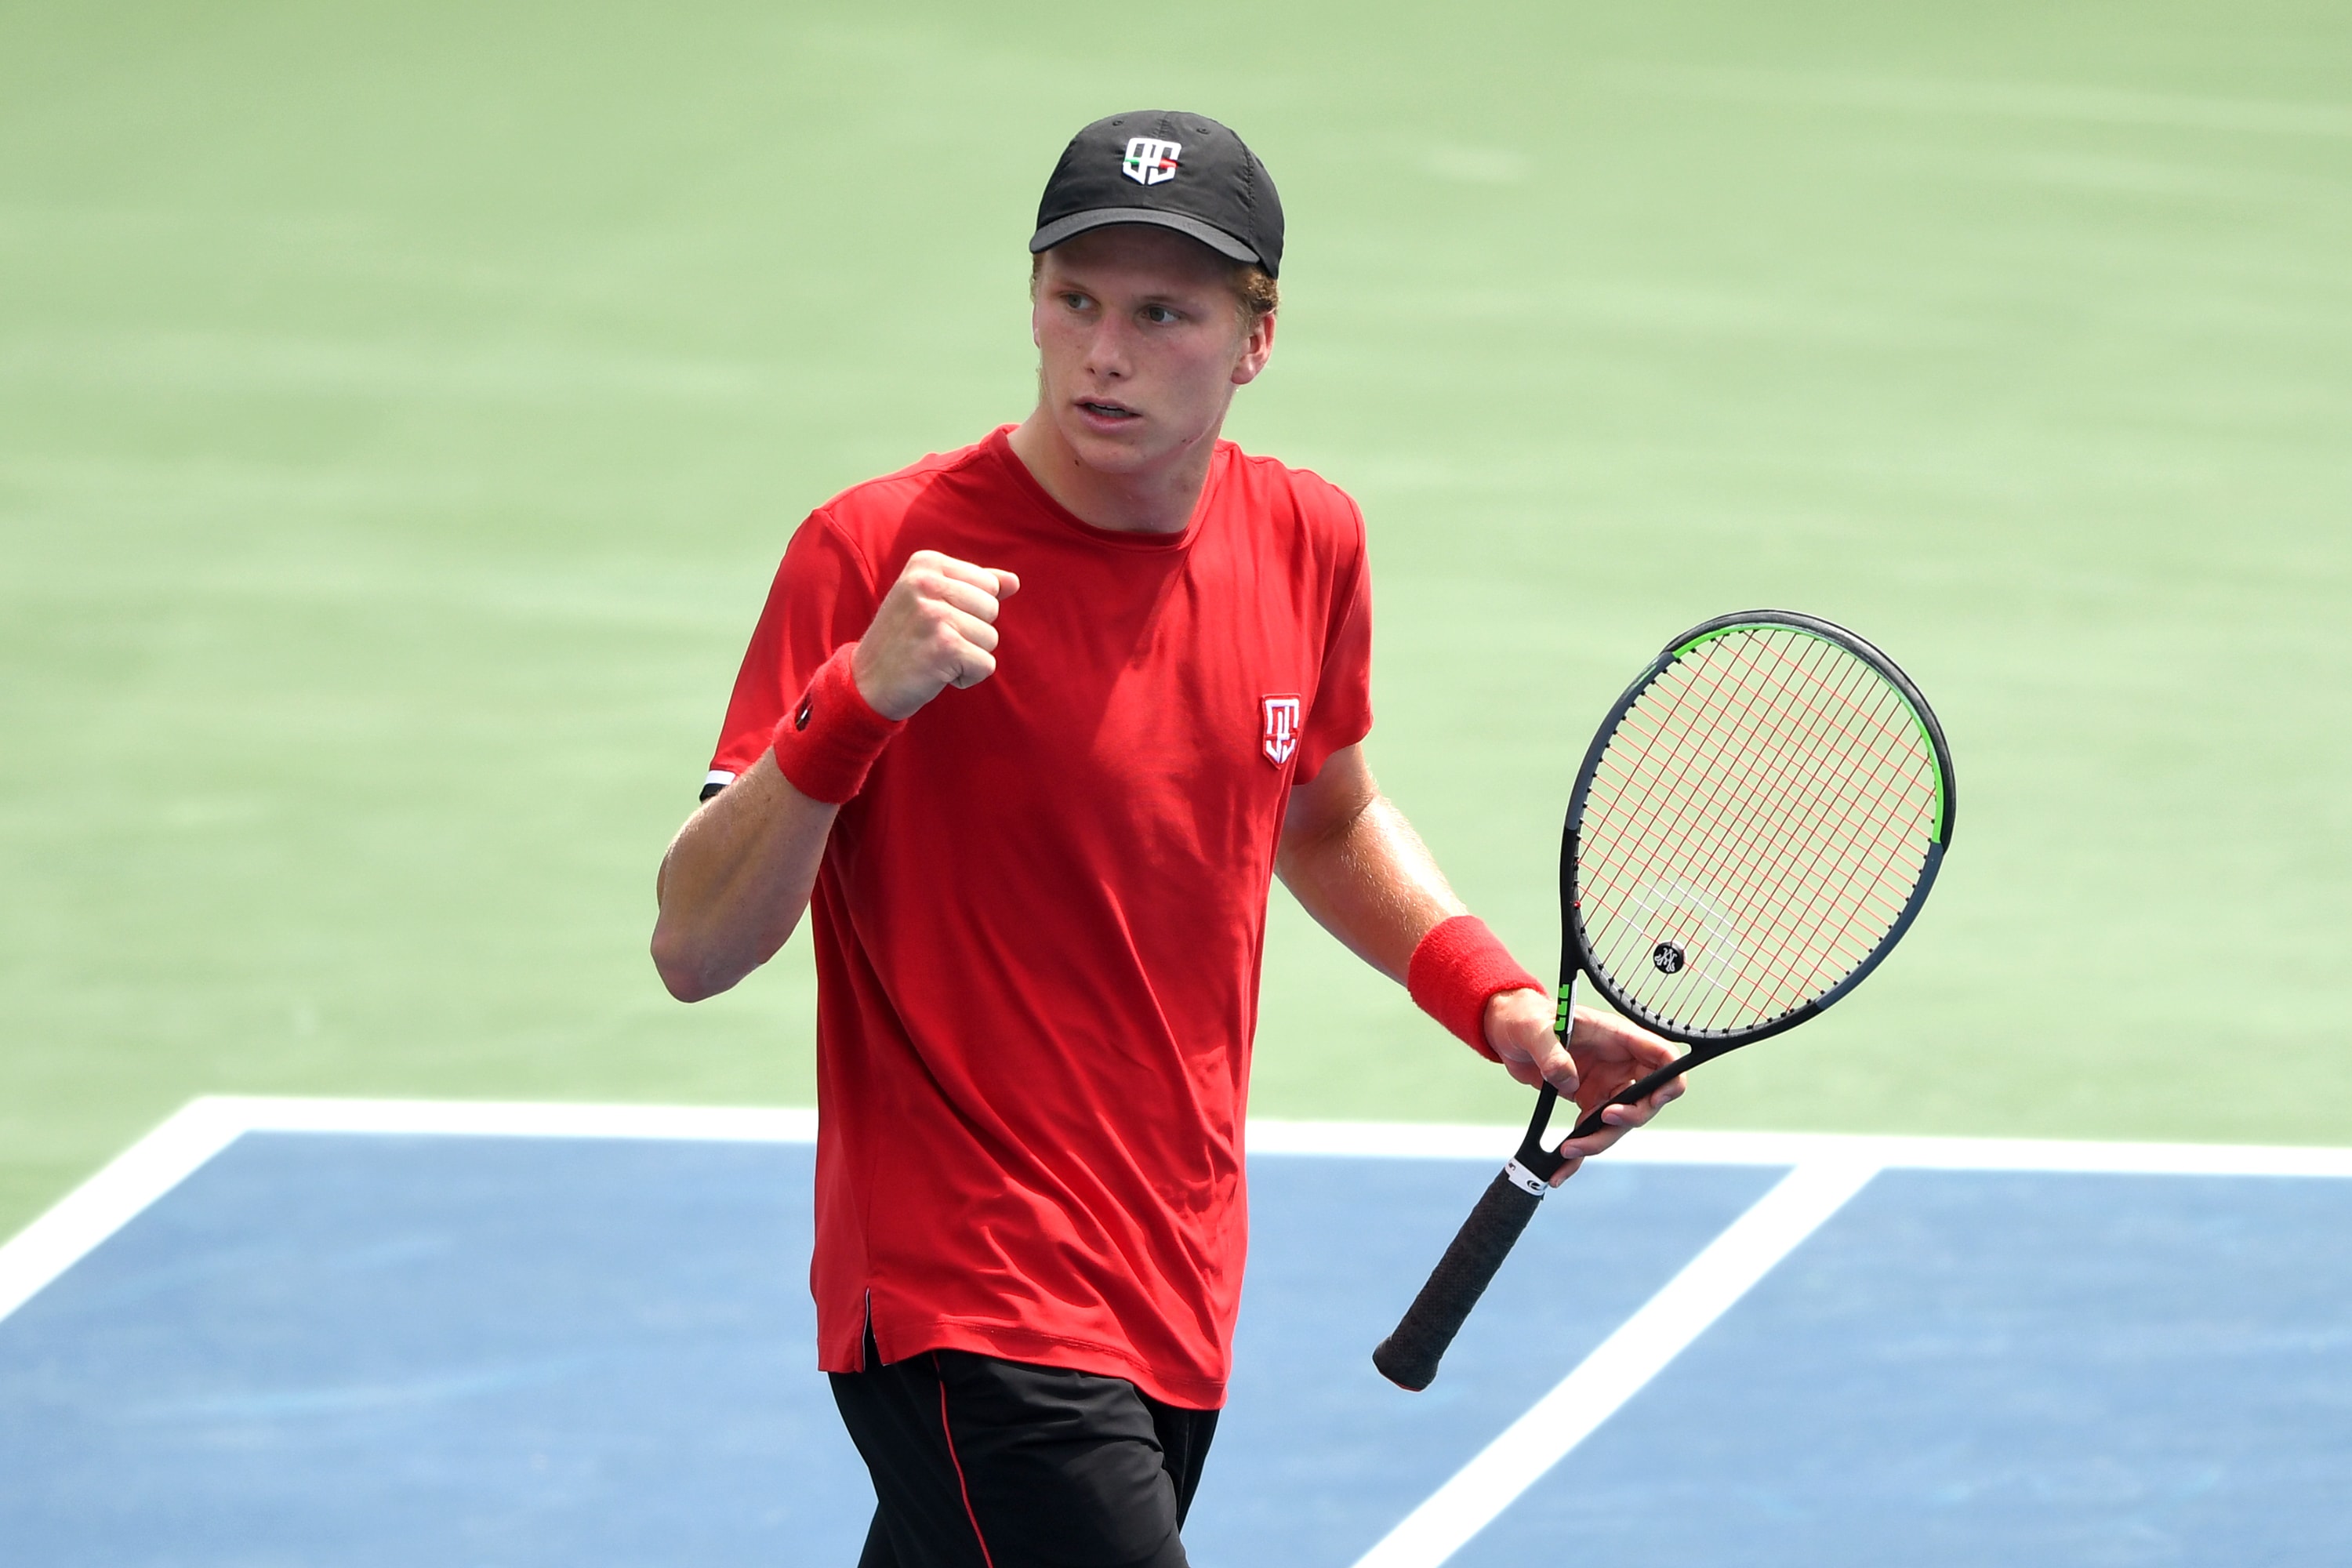 Through to the Citi Open semifinals, Brooksbys high tennis IQ keeps turning heads